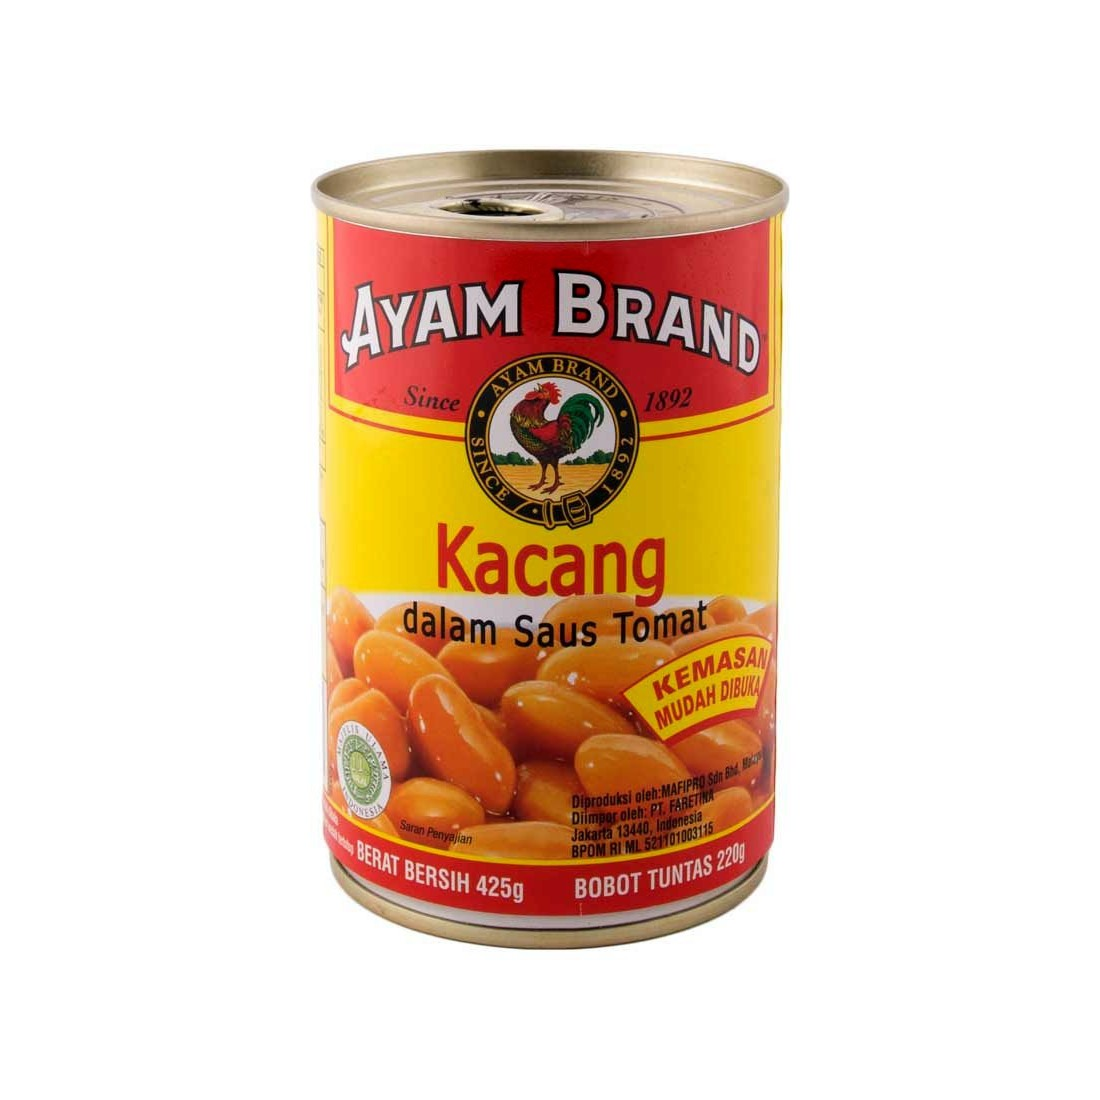 Ayam Brand 425g Baked Beans In Tomato Sauce